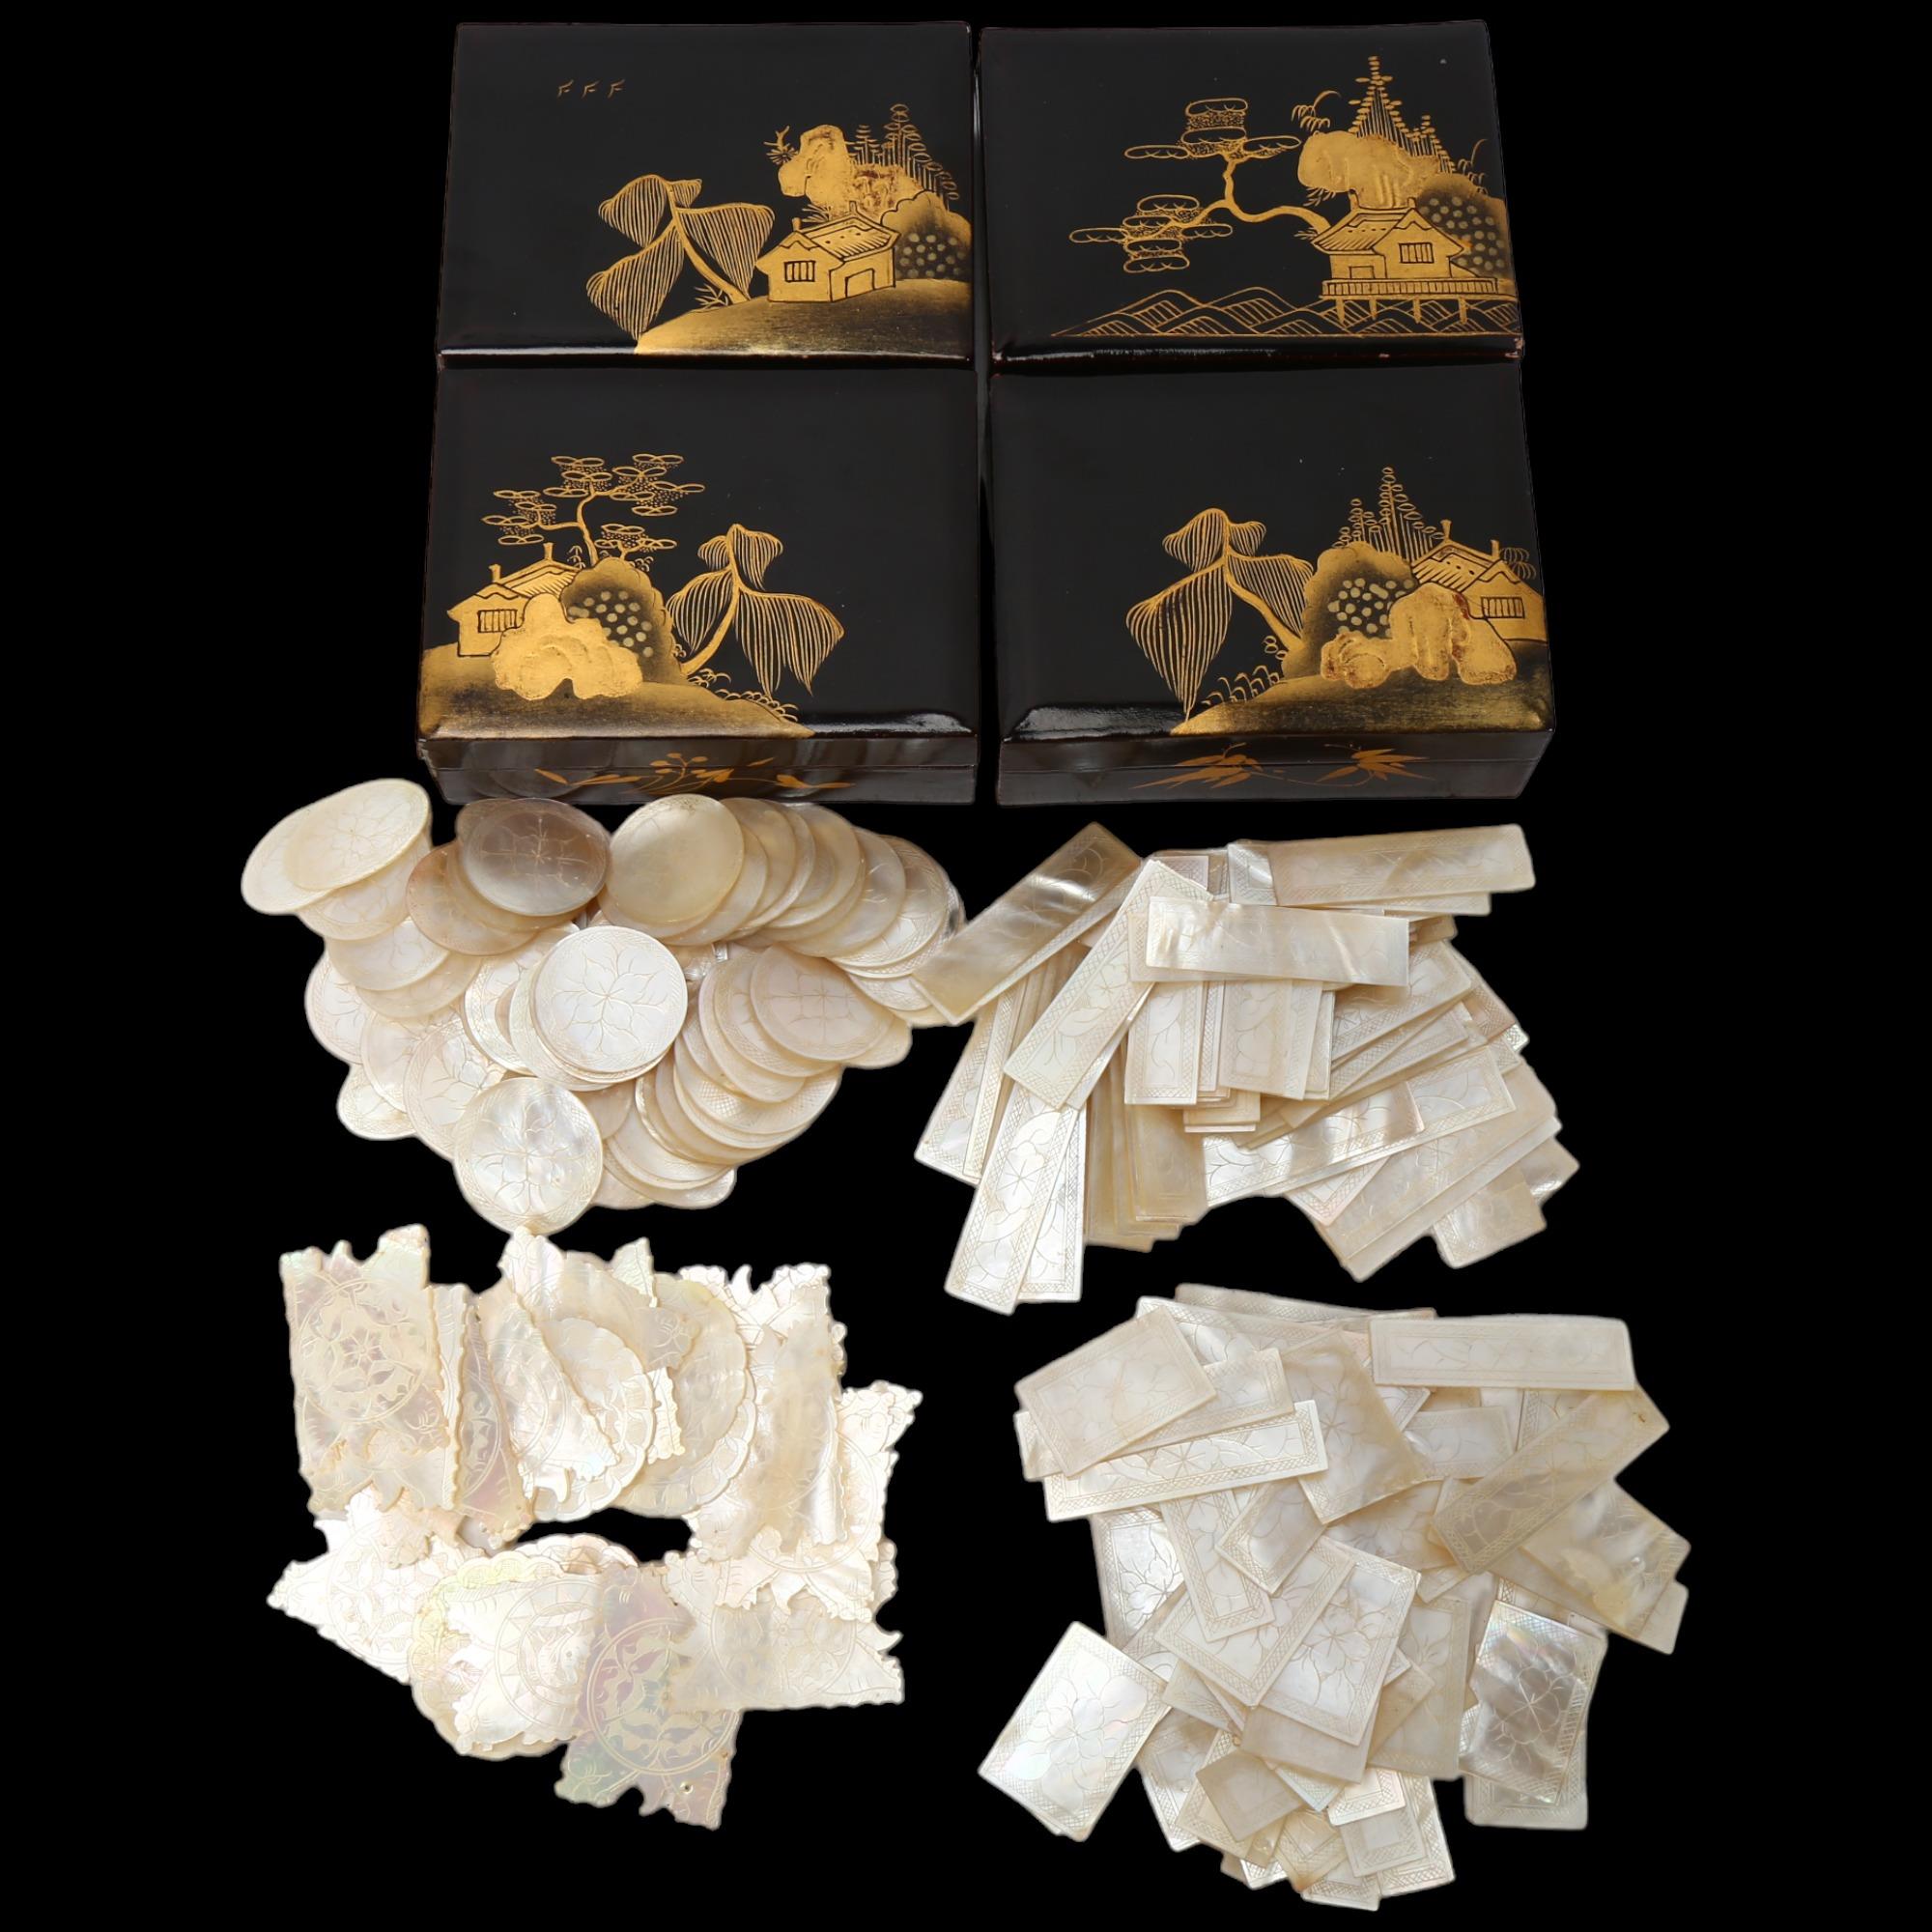 4 x 19th century Chinese gilded lacquer gaming boxes, containing a collection of mother-of-pearl